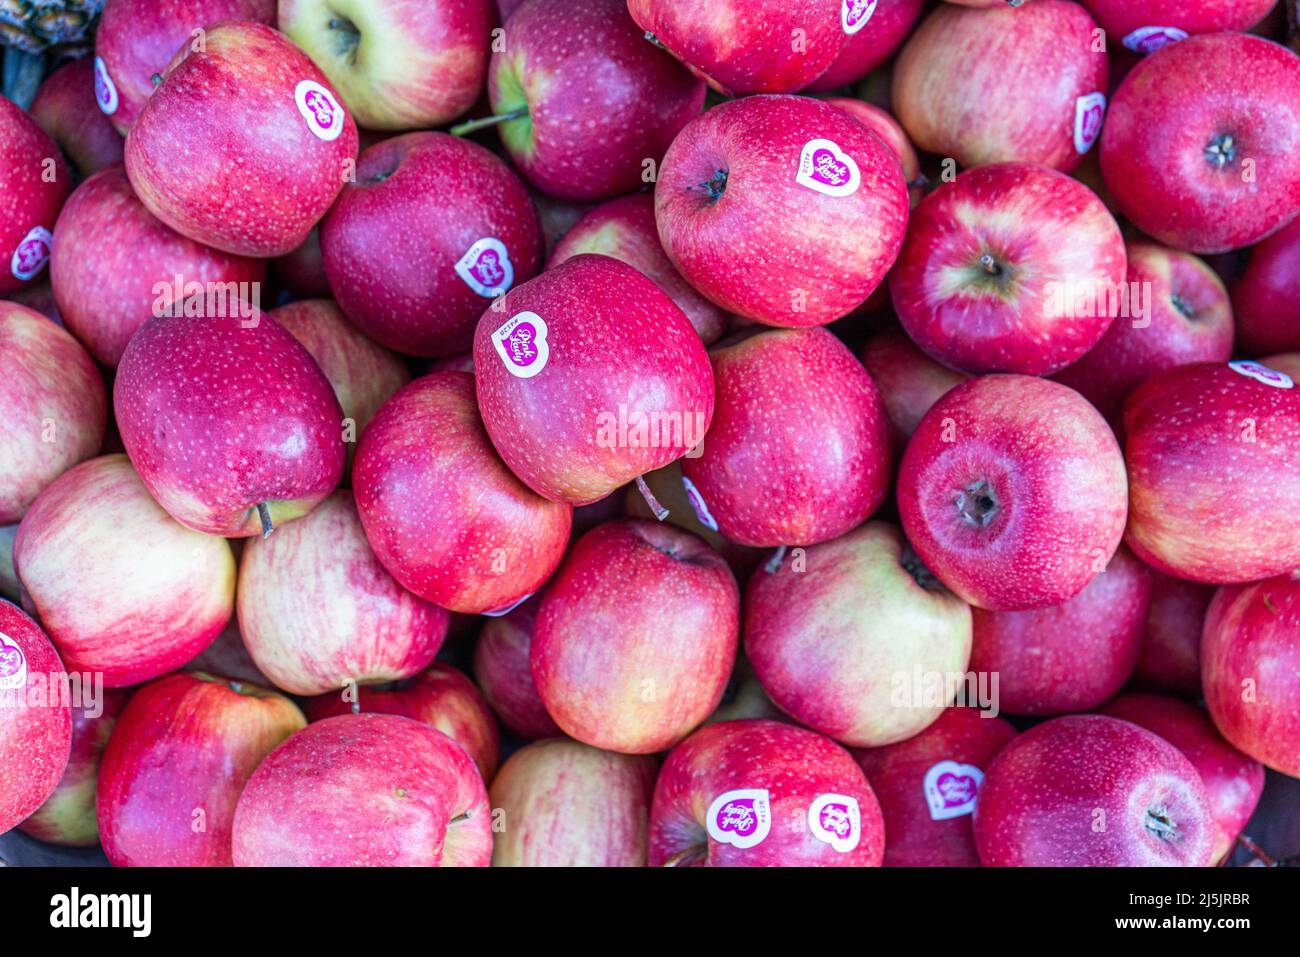 24 April 2022. Fresh  Granny Smith apples on display in grocery store, Wimbledon, London, UK Stock Photo